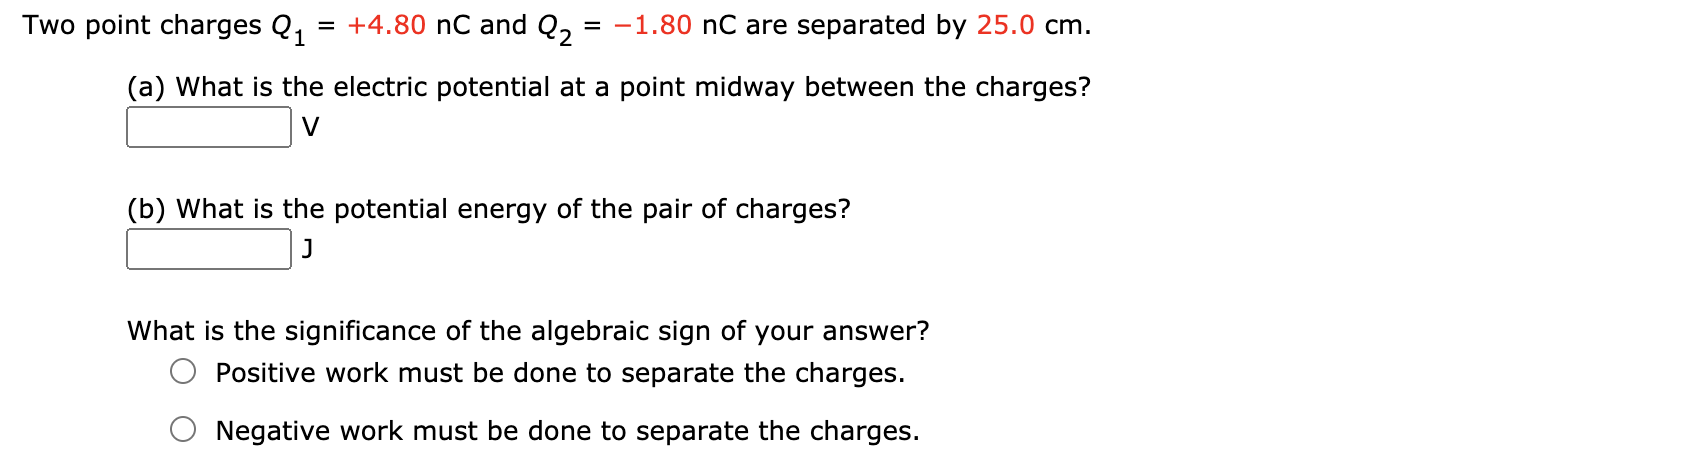 Two point charges Q1
= +4.80 nC and Q,
= -1.80 nC are separated by 25.0 cm.
(a) What is the electric potential at a point midway between the charges?
V
(b) What is the potential energy of the pair of charges?
What is the significance of the algebraic sign of your answer?
Positive work must be done to separate the charges.
Negative work must be done to separate the charges.
